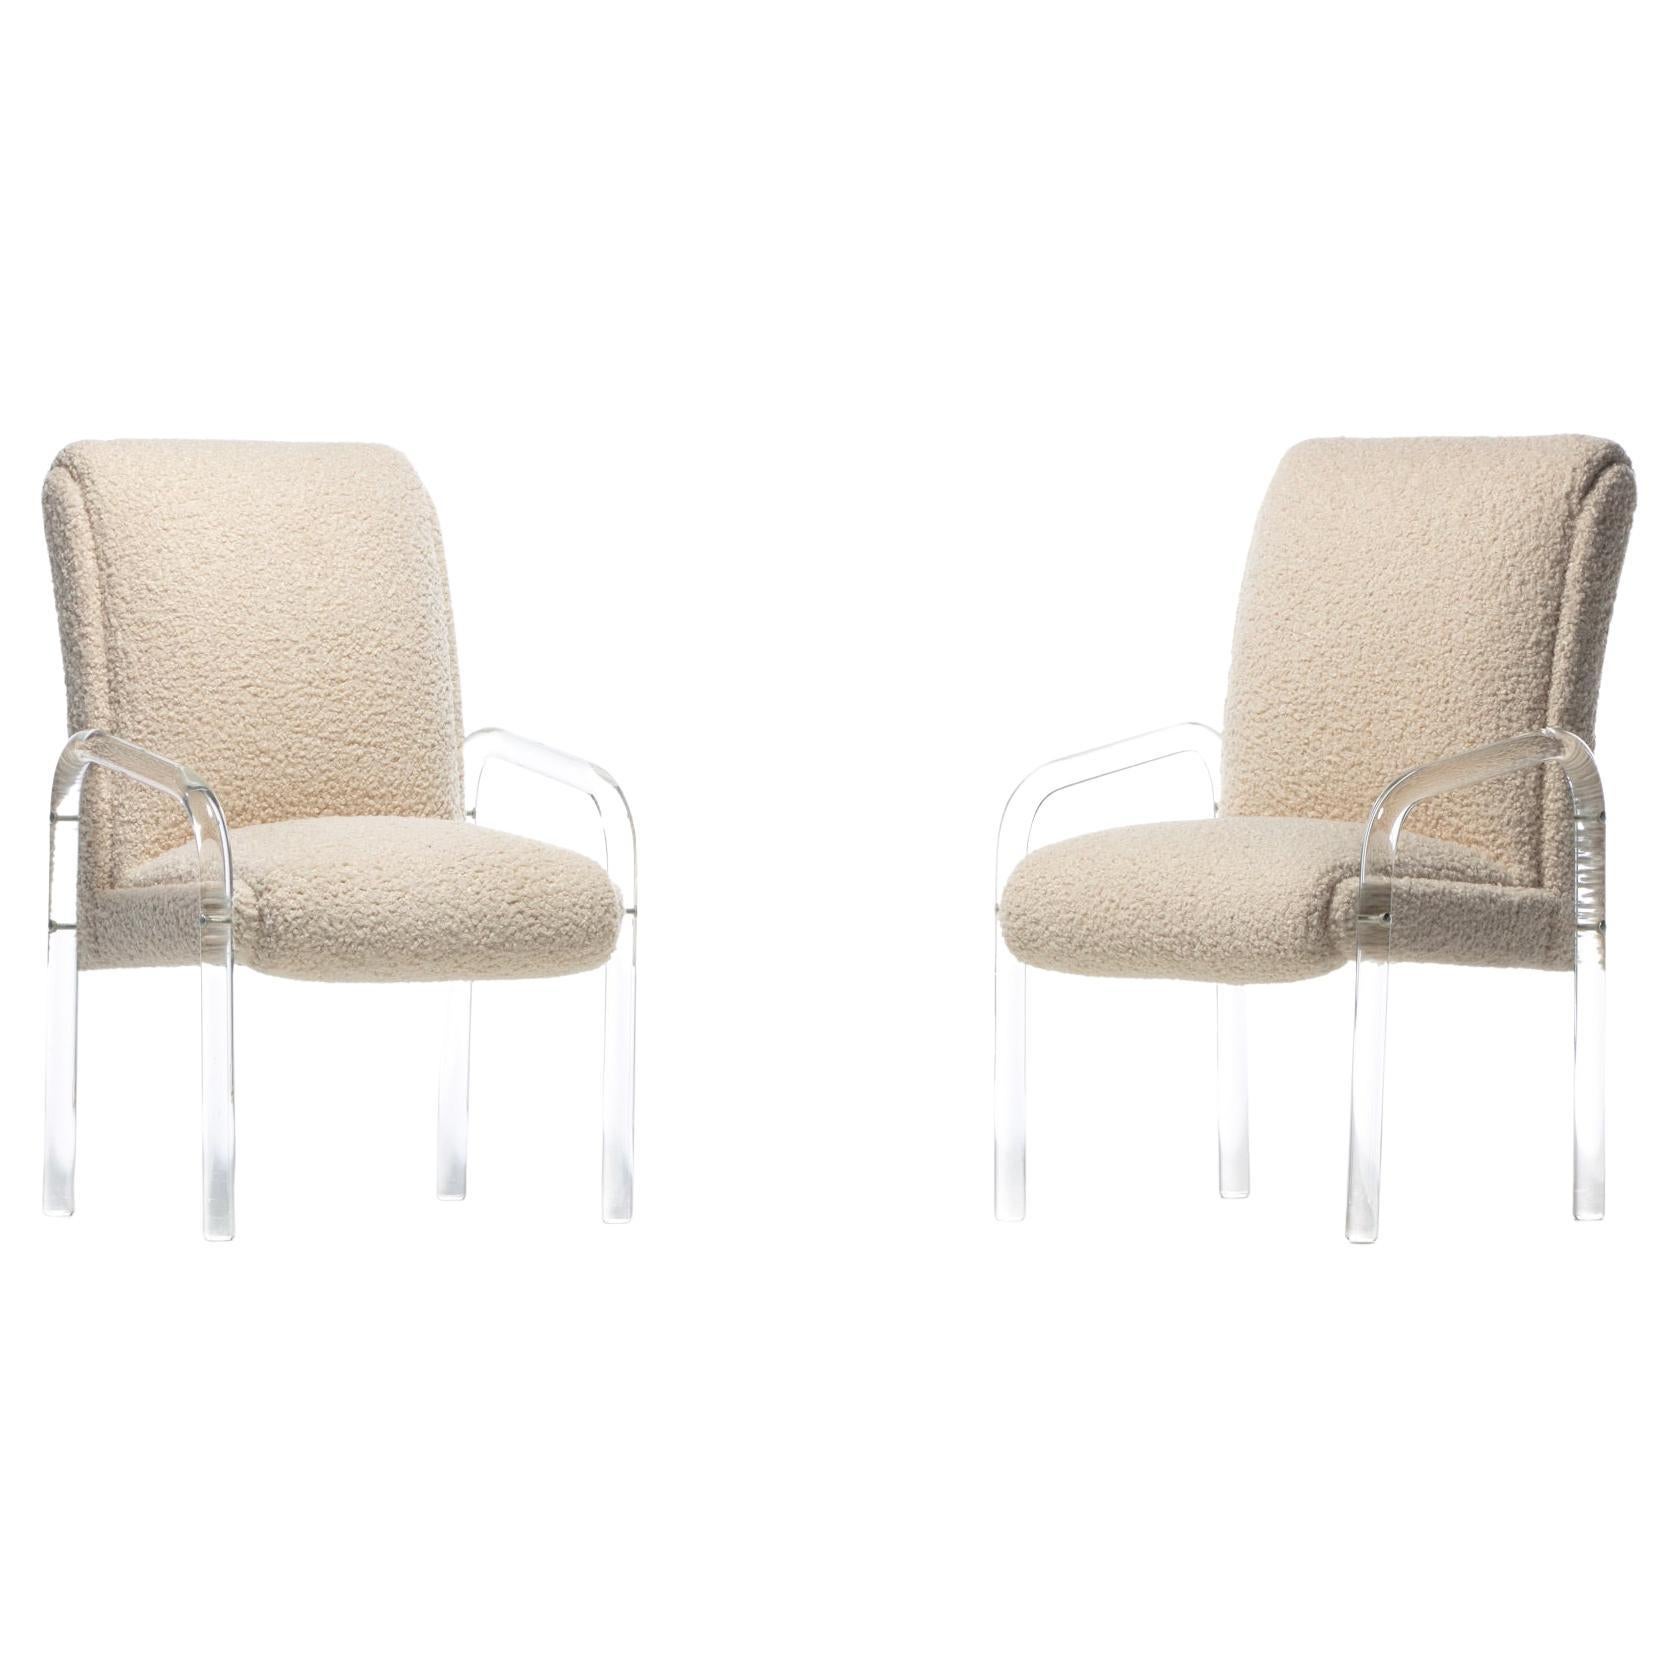 Pair of Lucite Arm Chairs by Leon Rosen for Pace Collection c. 1970